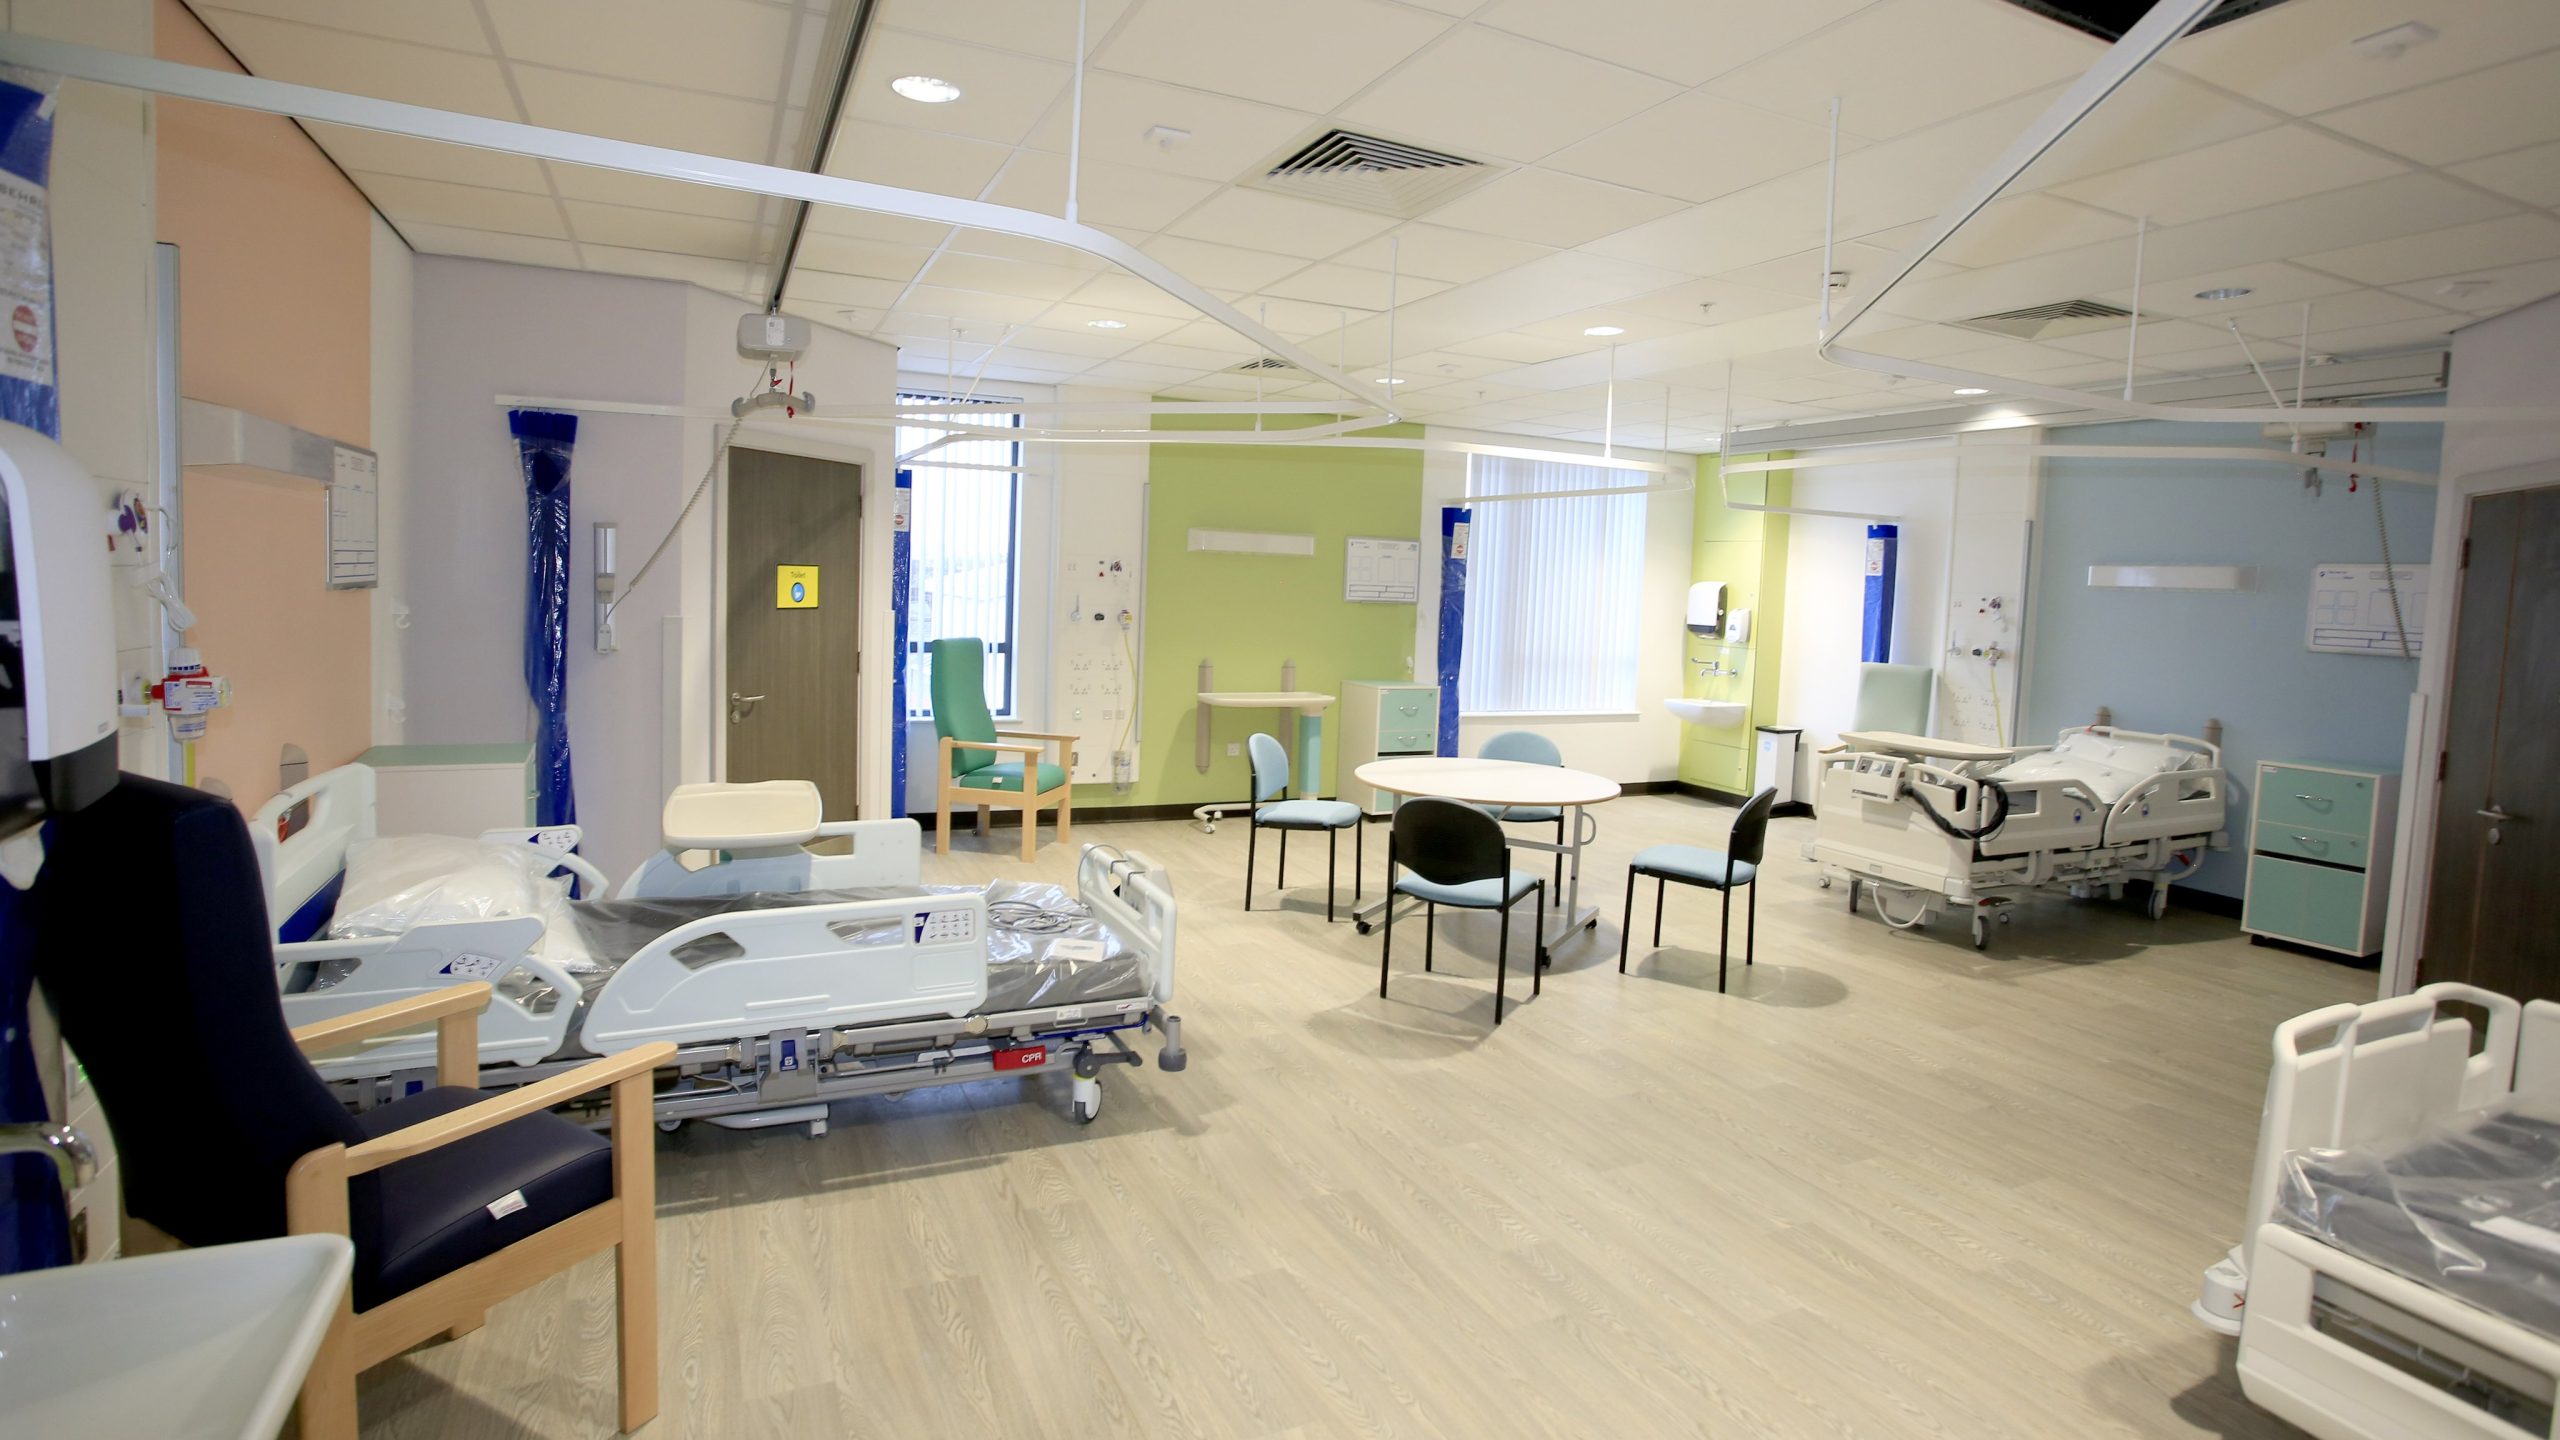 NEWS | Three new wards at Hereford County Hospital named after local hills